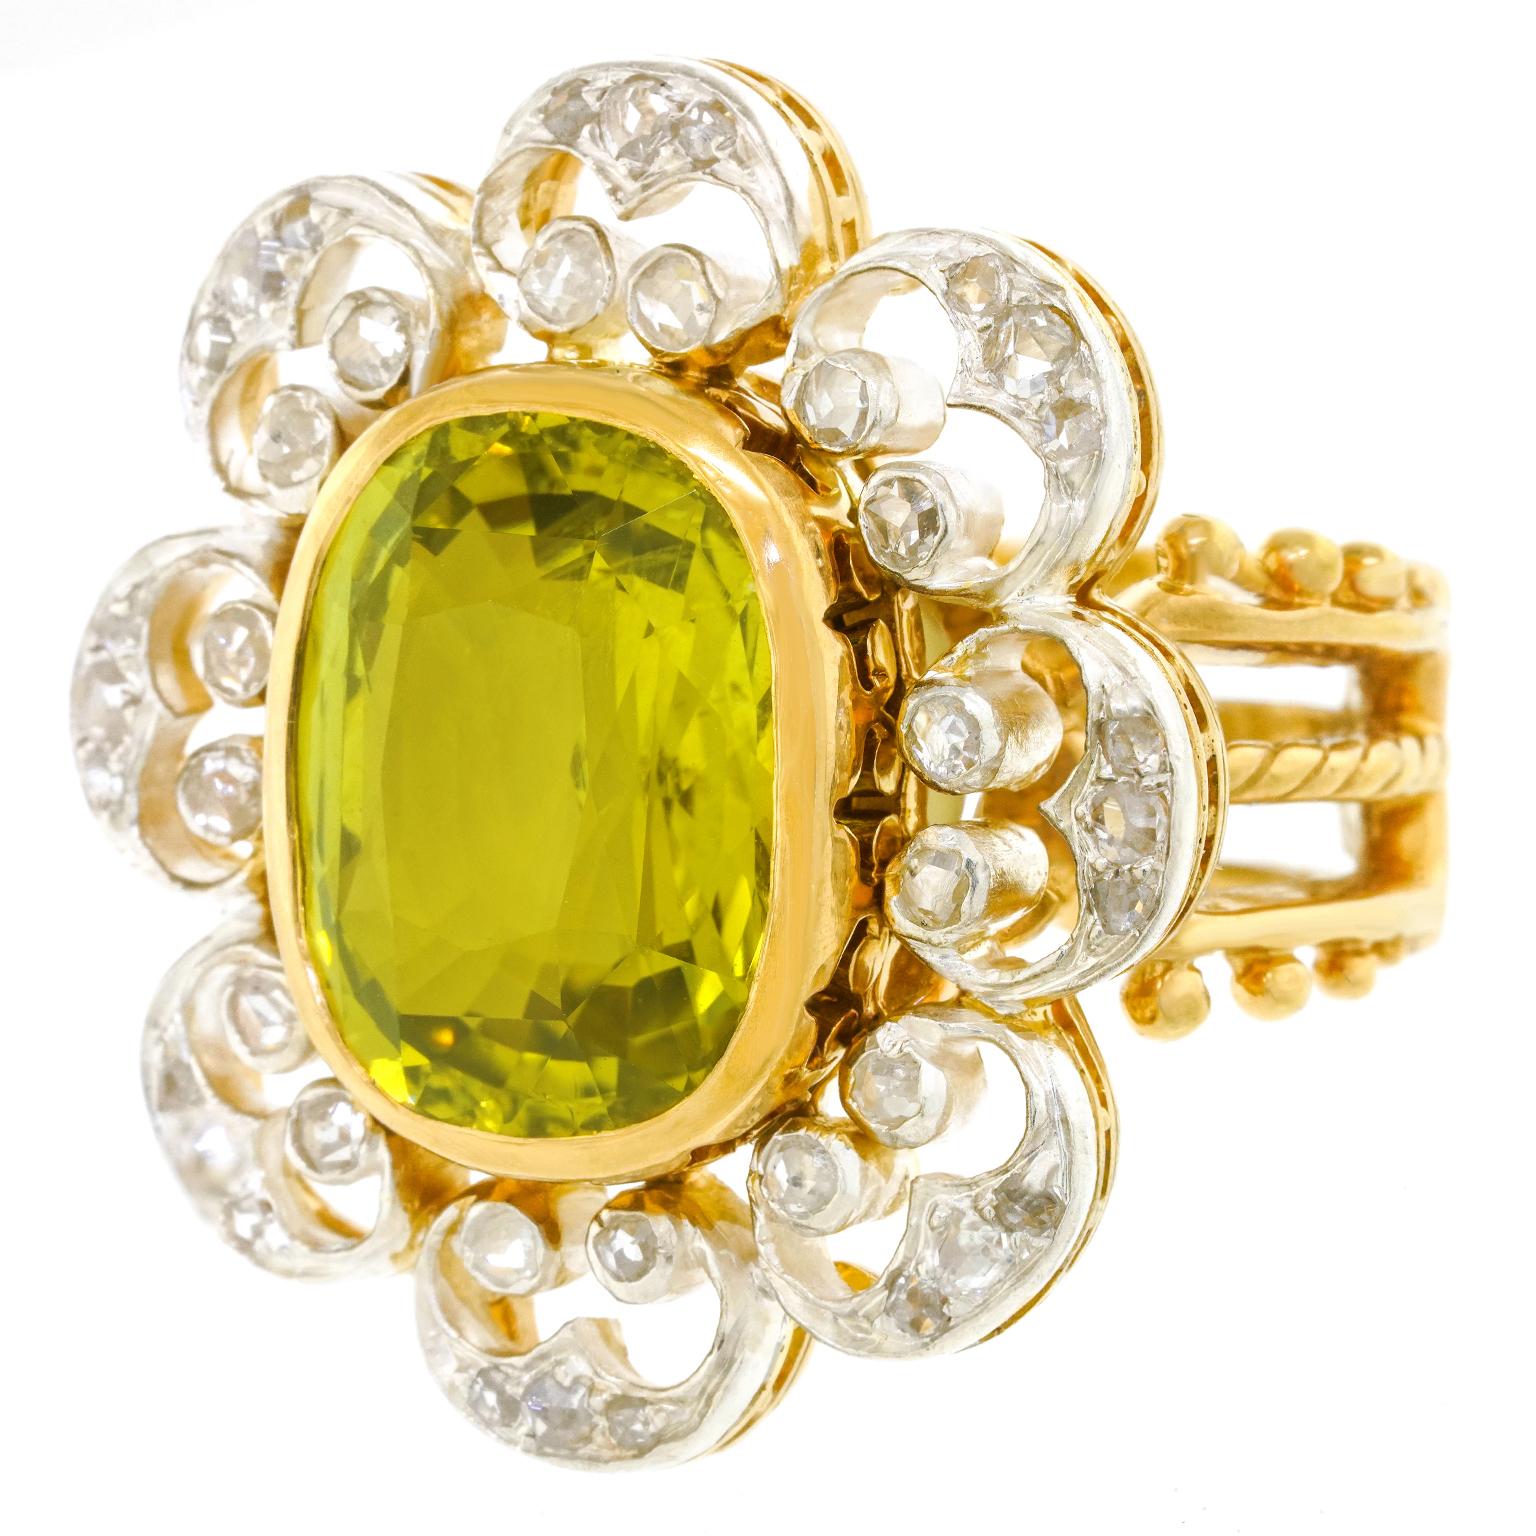 Natural Chrysoberyl in Antique Mounting with Rose-Cut Diamonds GIA 6